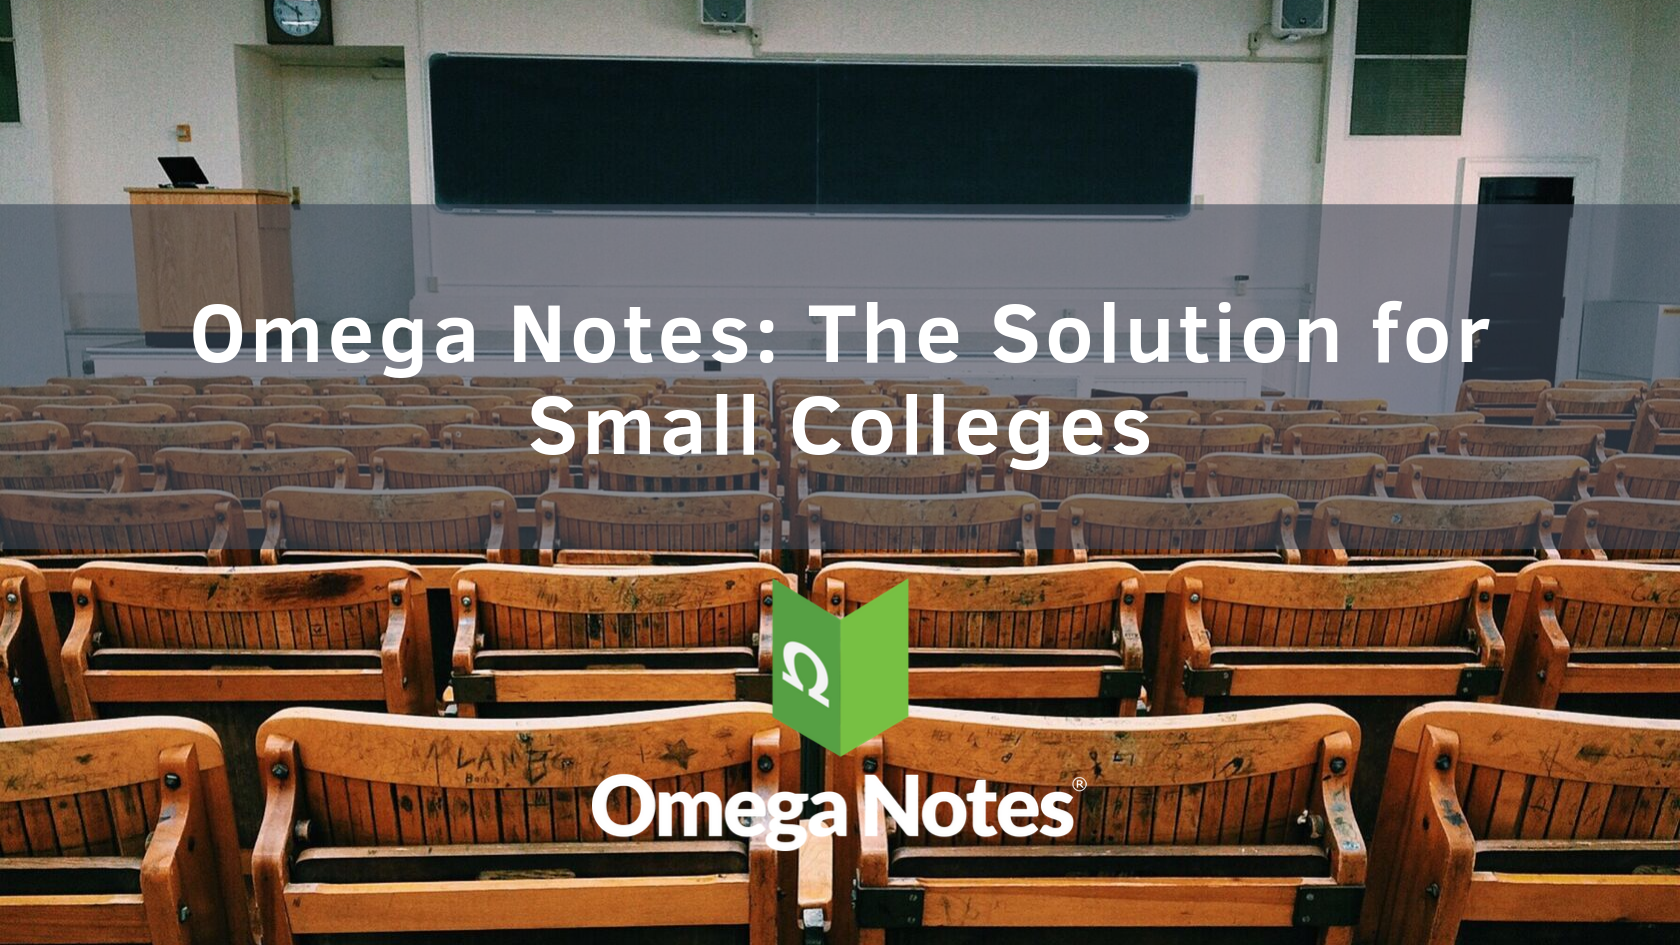 Omega Notes The Solution for Small Colleges